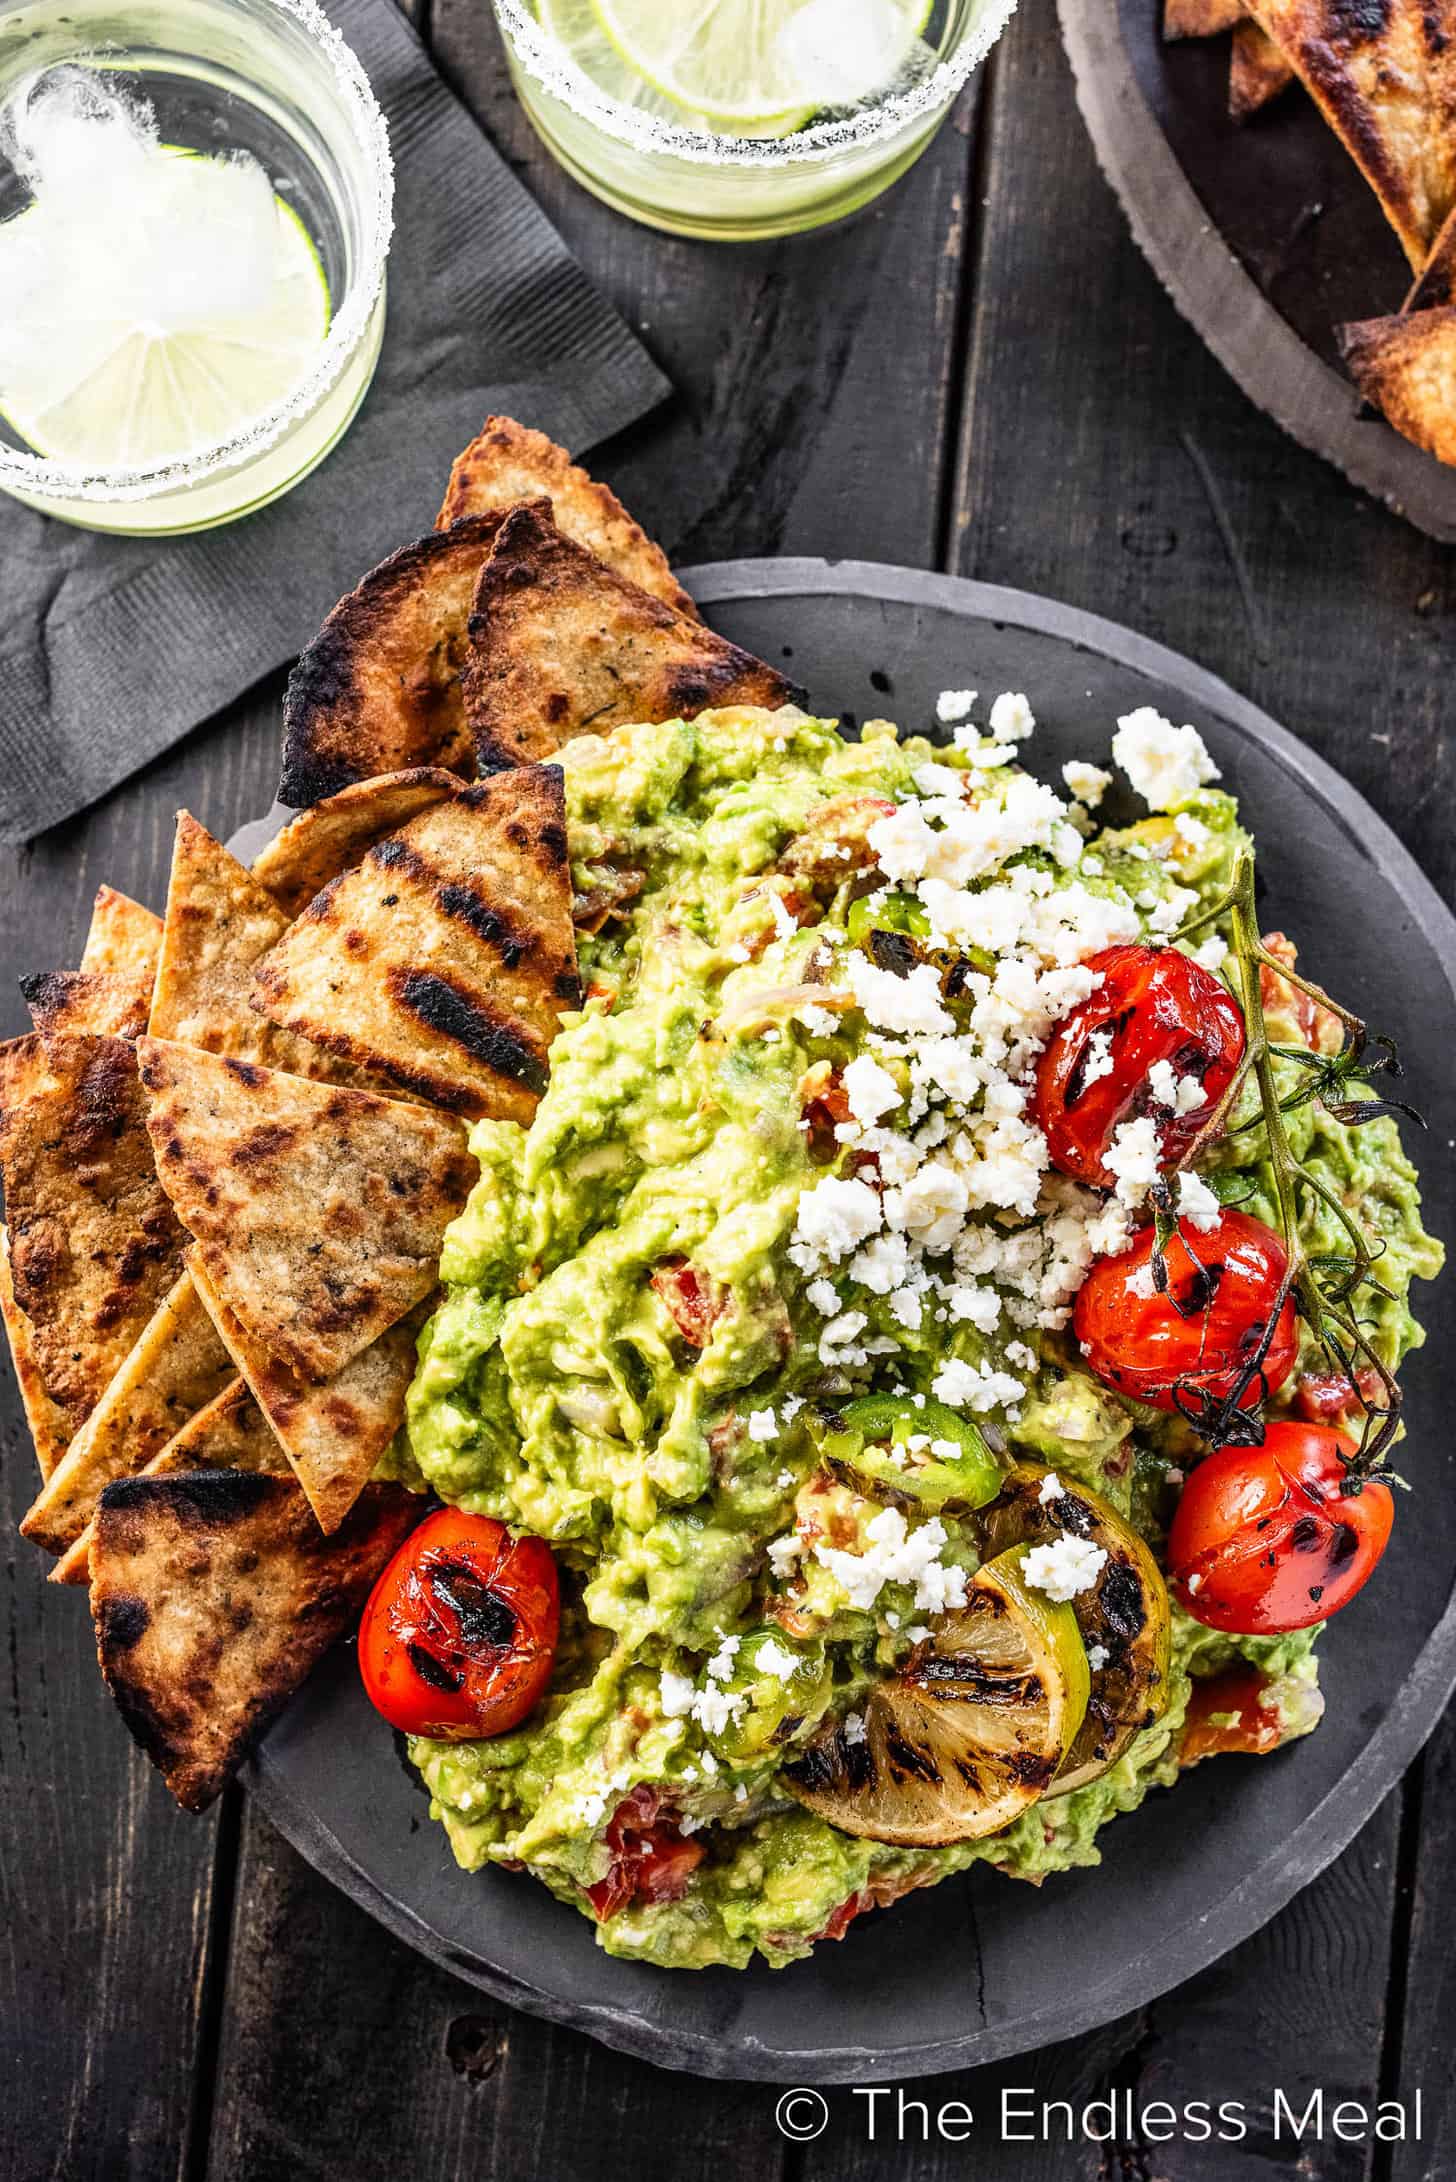 Grilled Guacamole with grilled veggies